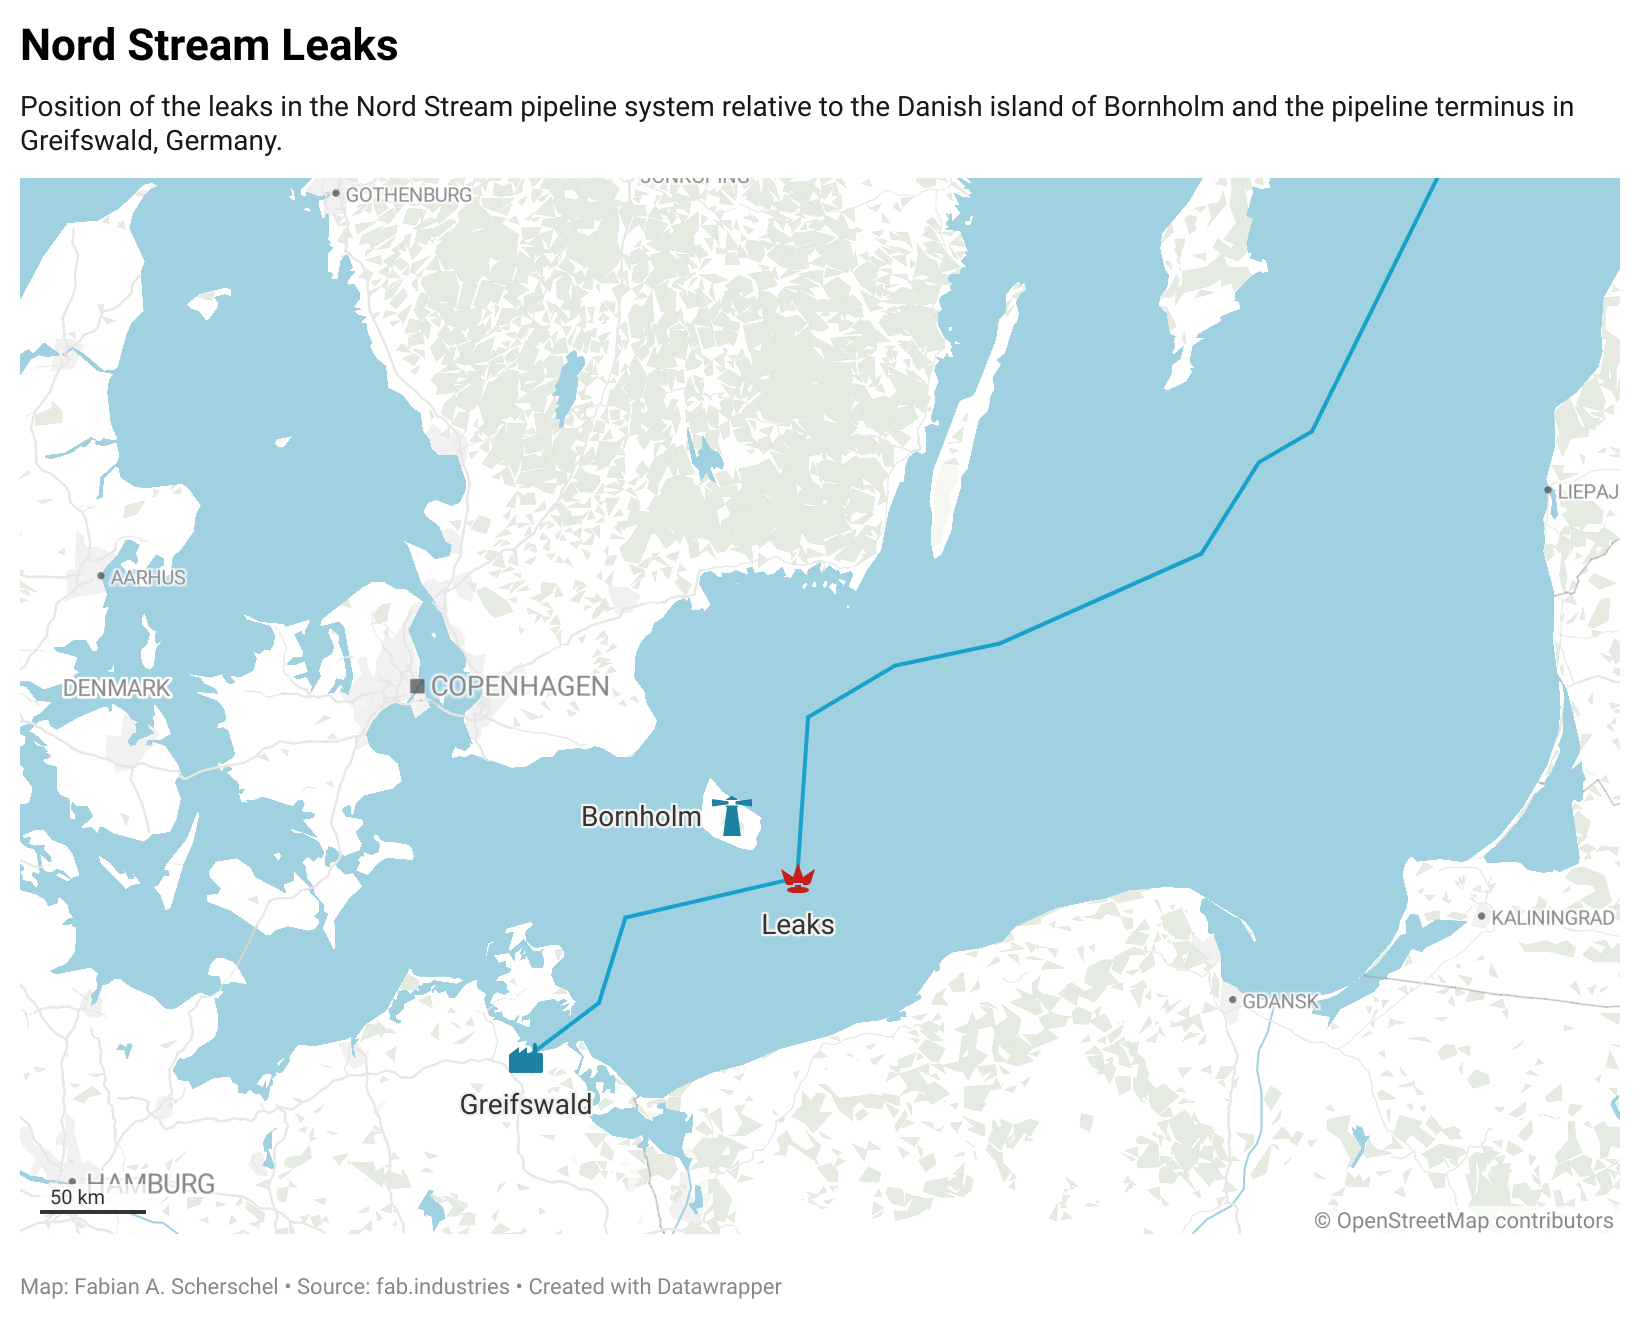 Maps of the Nord Stream leaks